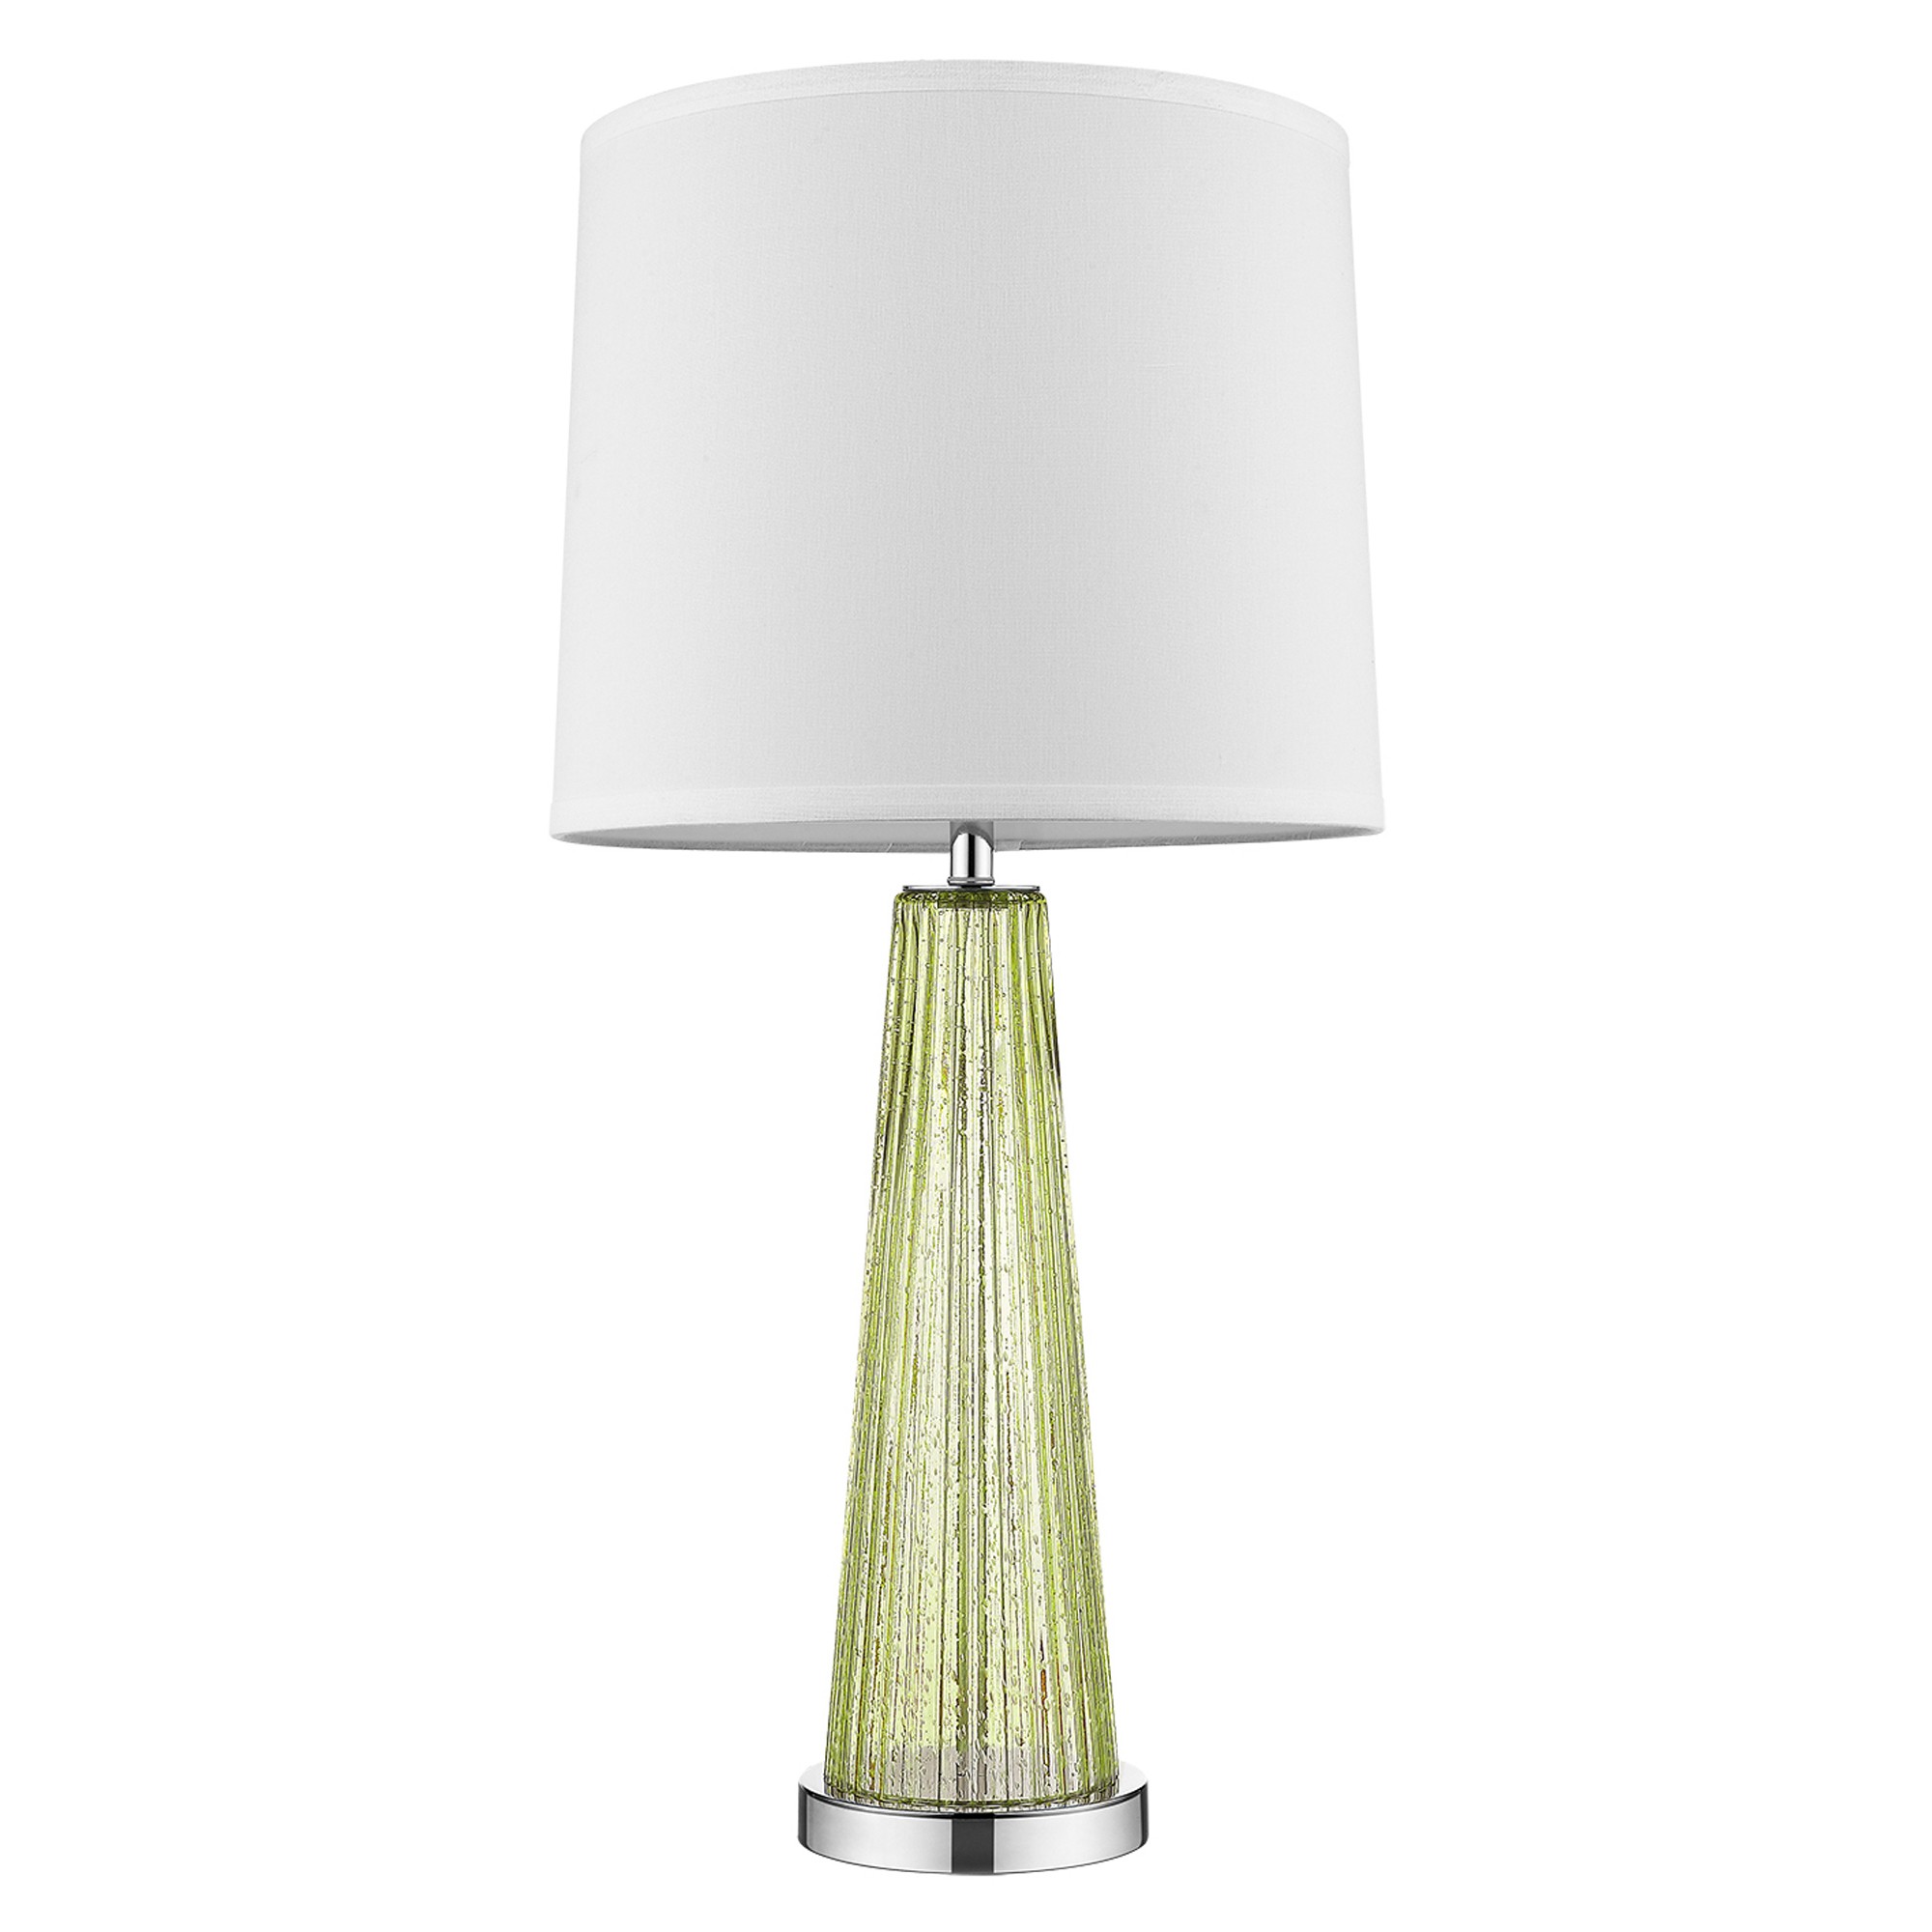 Chiara 1-Light Apple Green Glass And Polished Chrome Table Lamp With Off White Shantung Shade